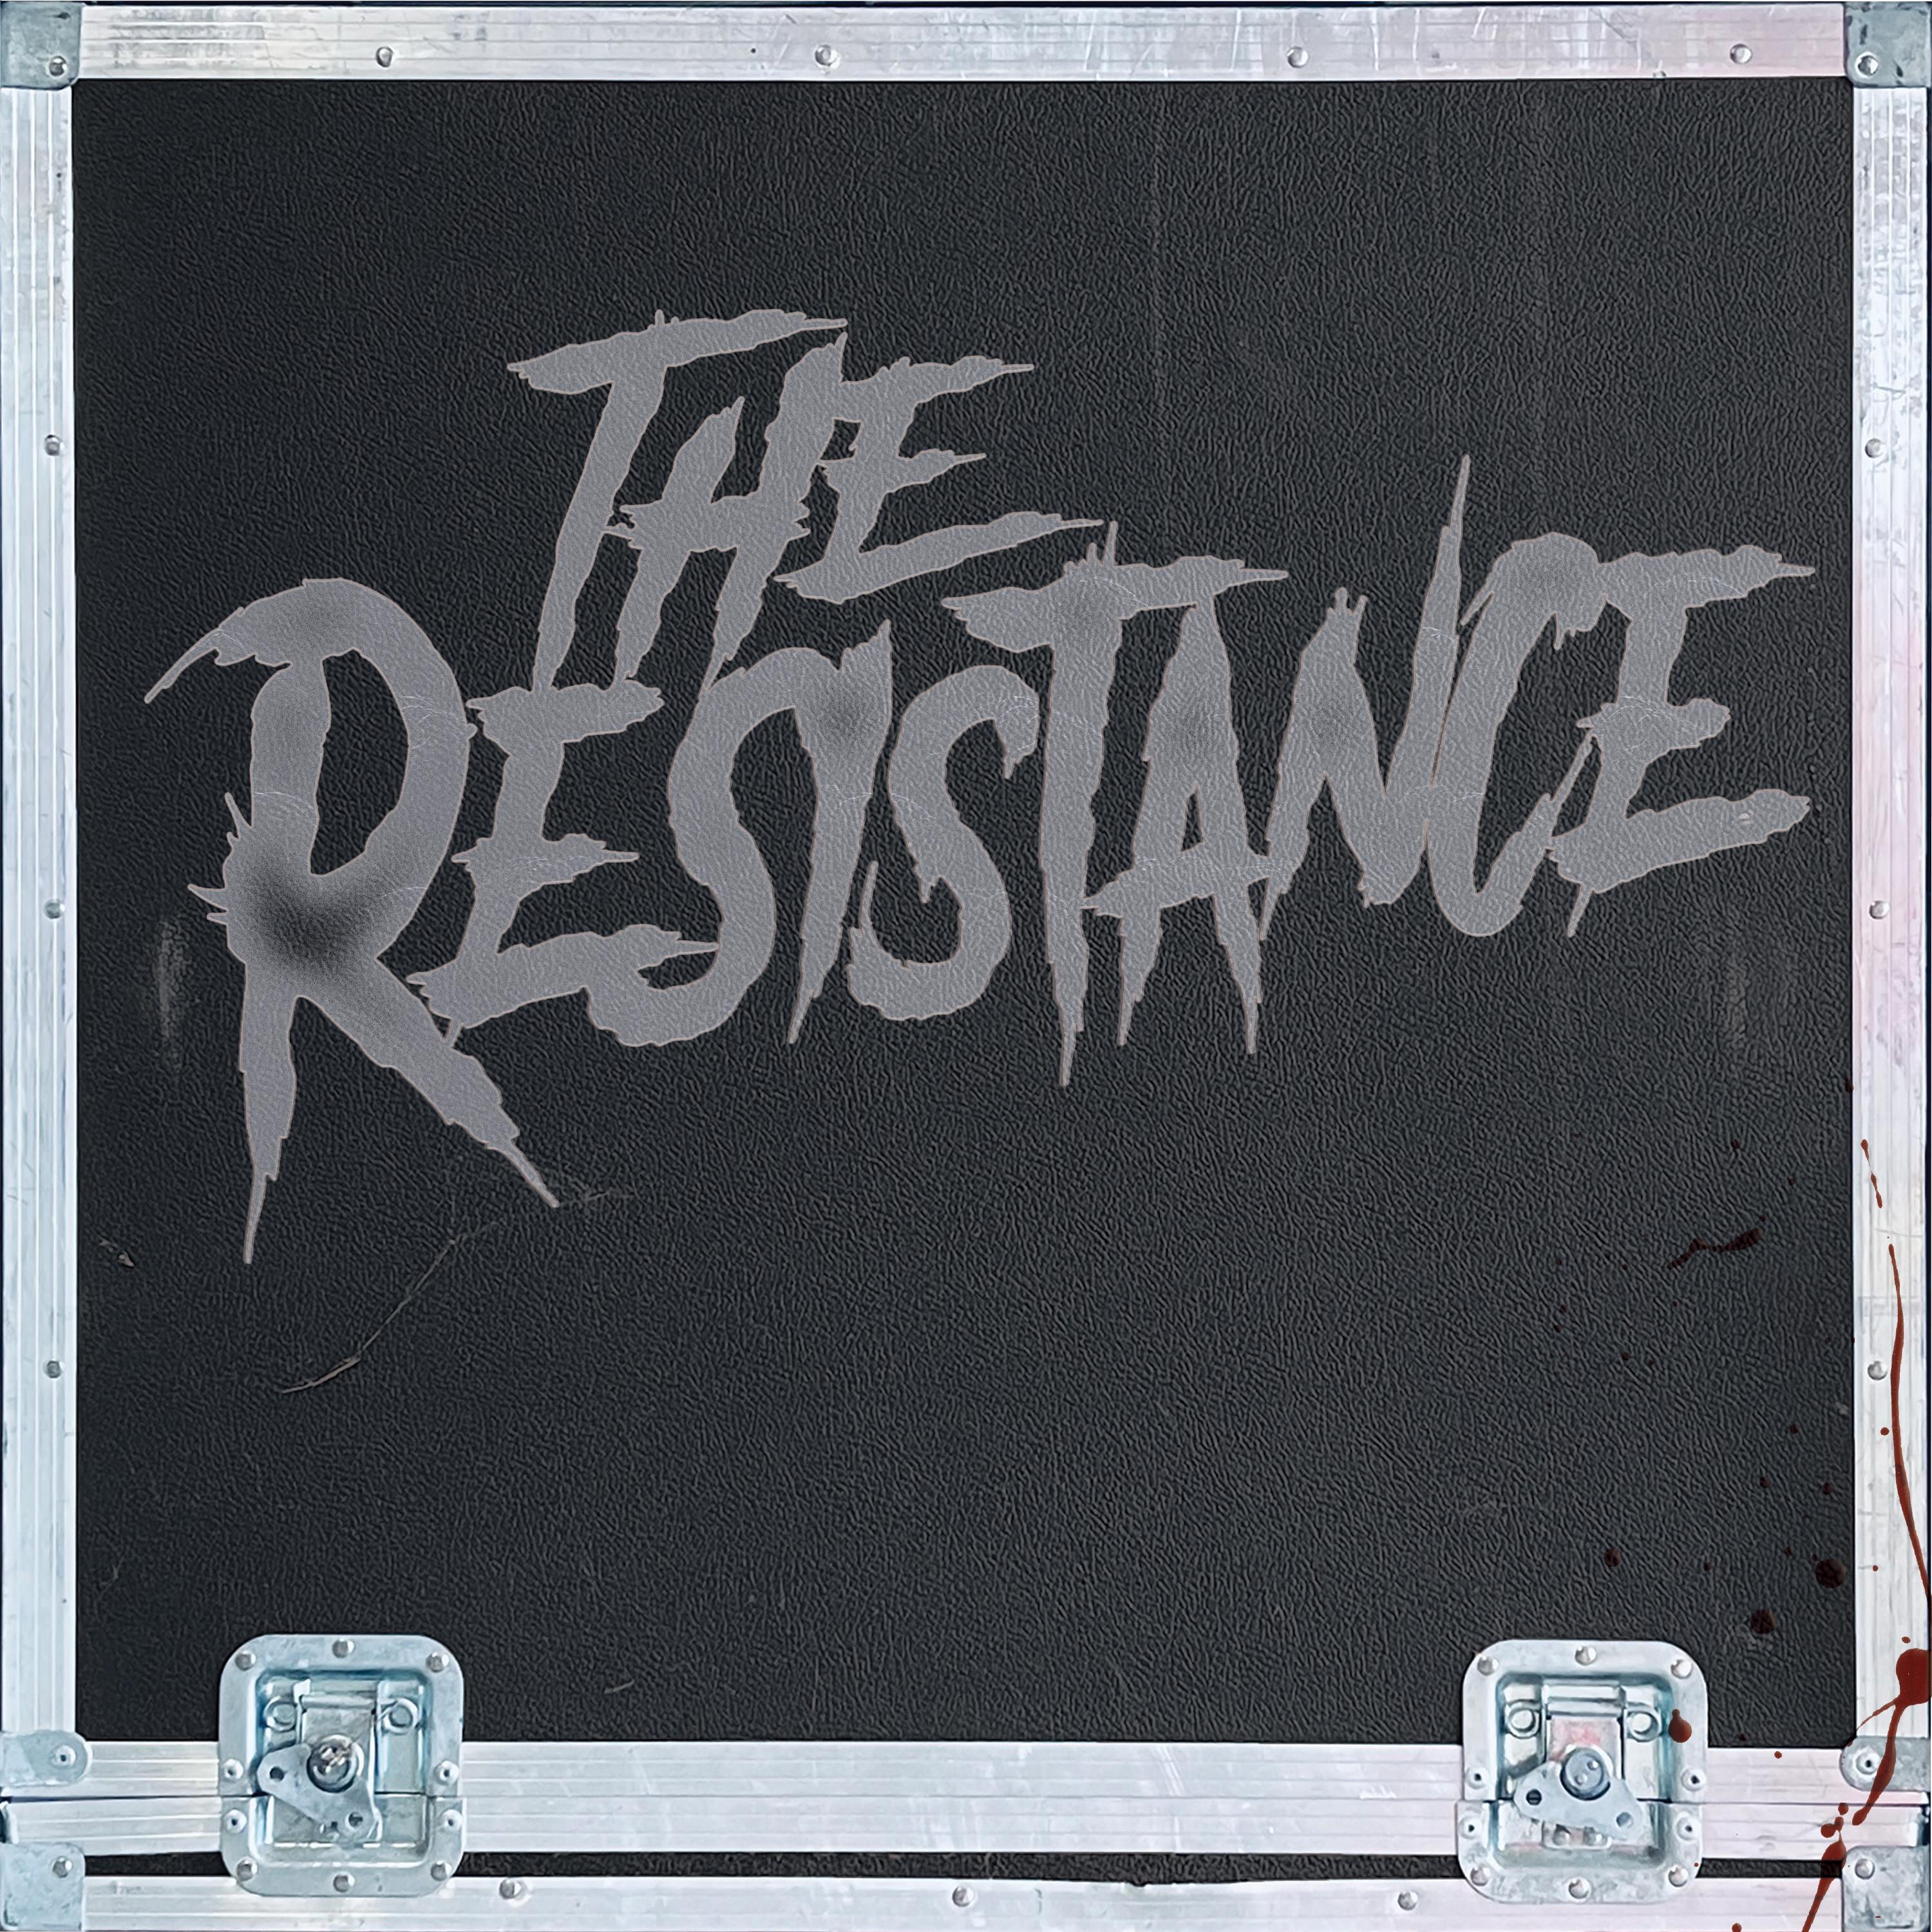 The Resistance - 10 4 The $